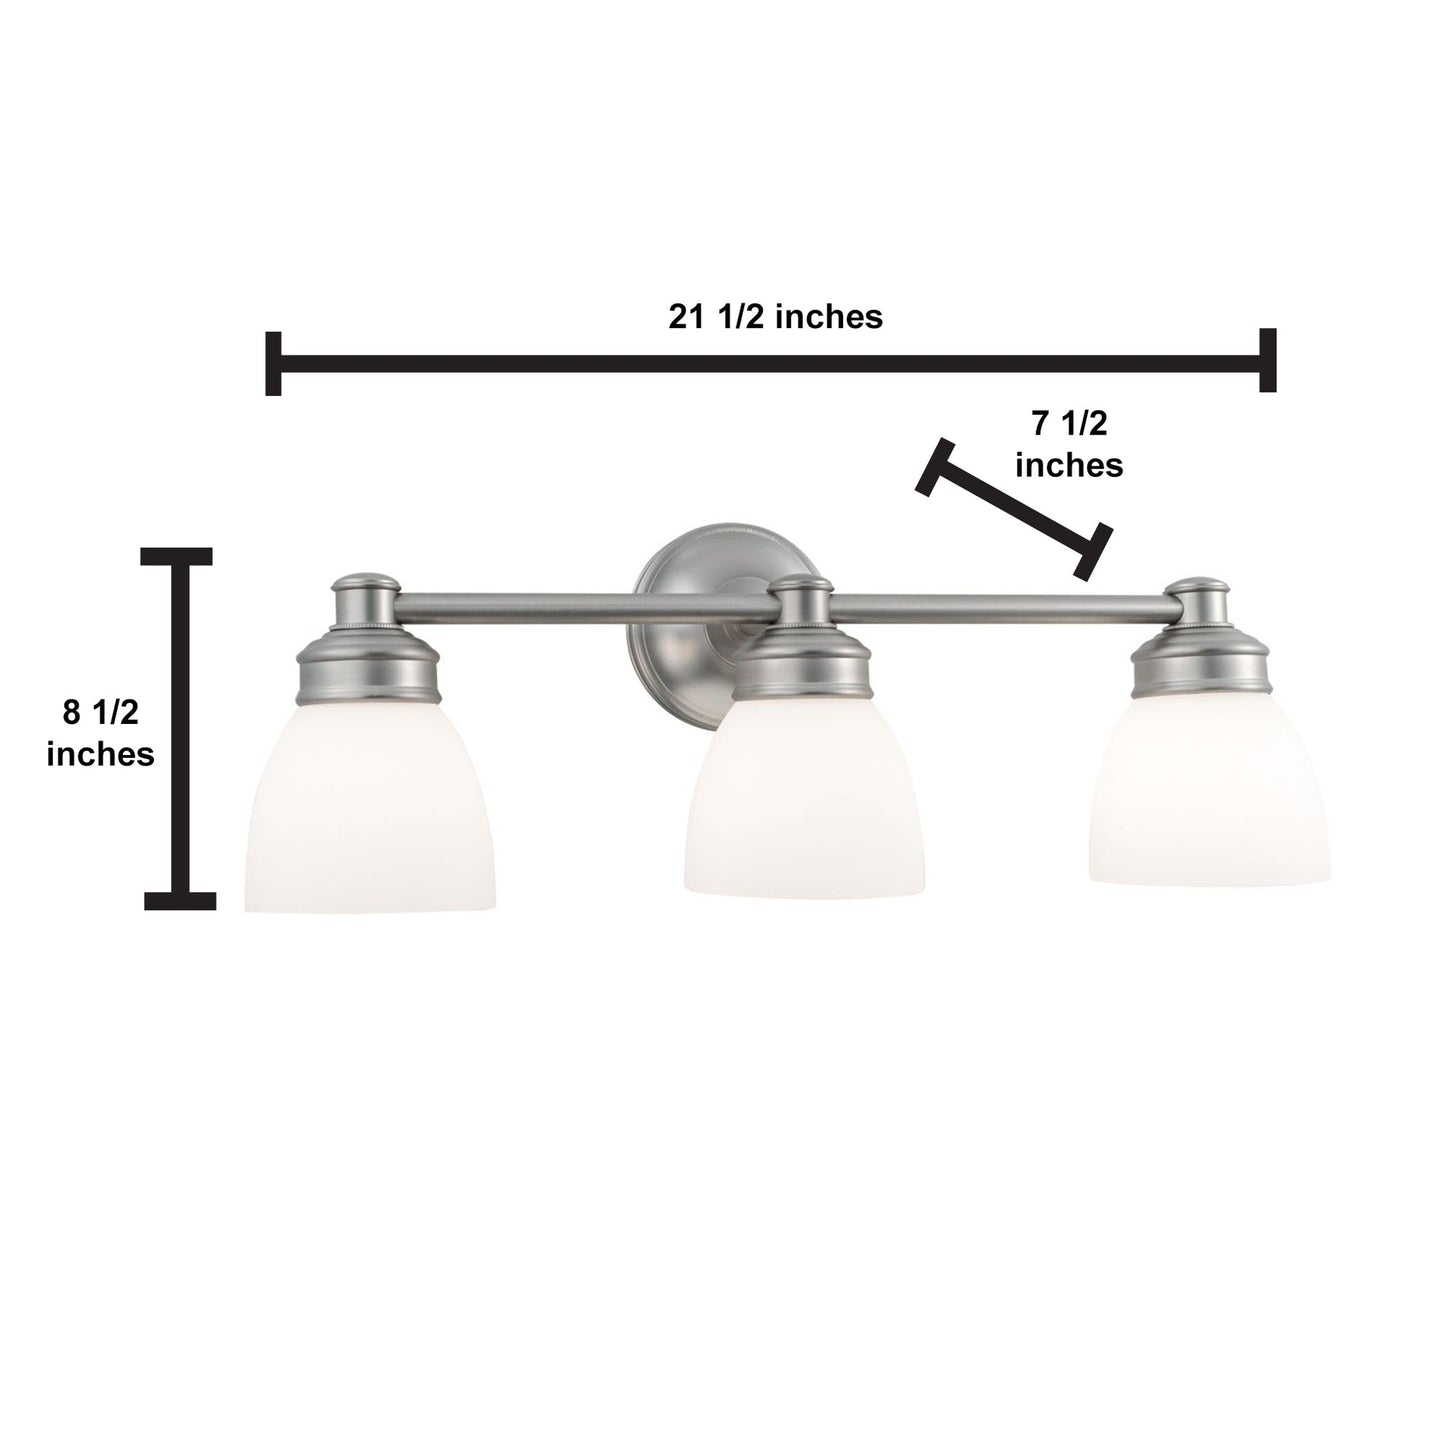 Norwell Lighting Spencer 9" x 5" 3-Light Sconce Chrome Vanity Light With Opal Glass Diffuser